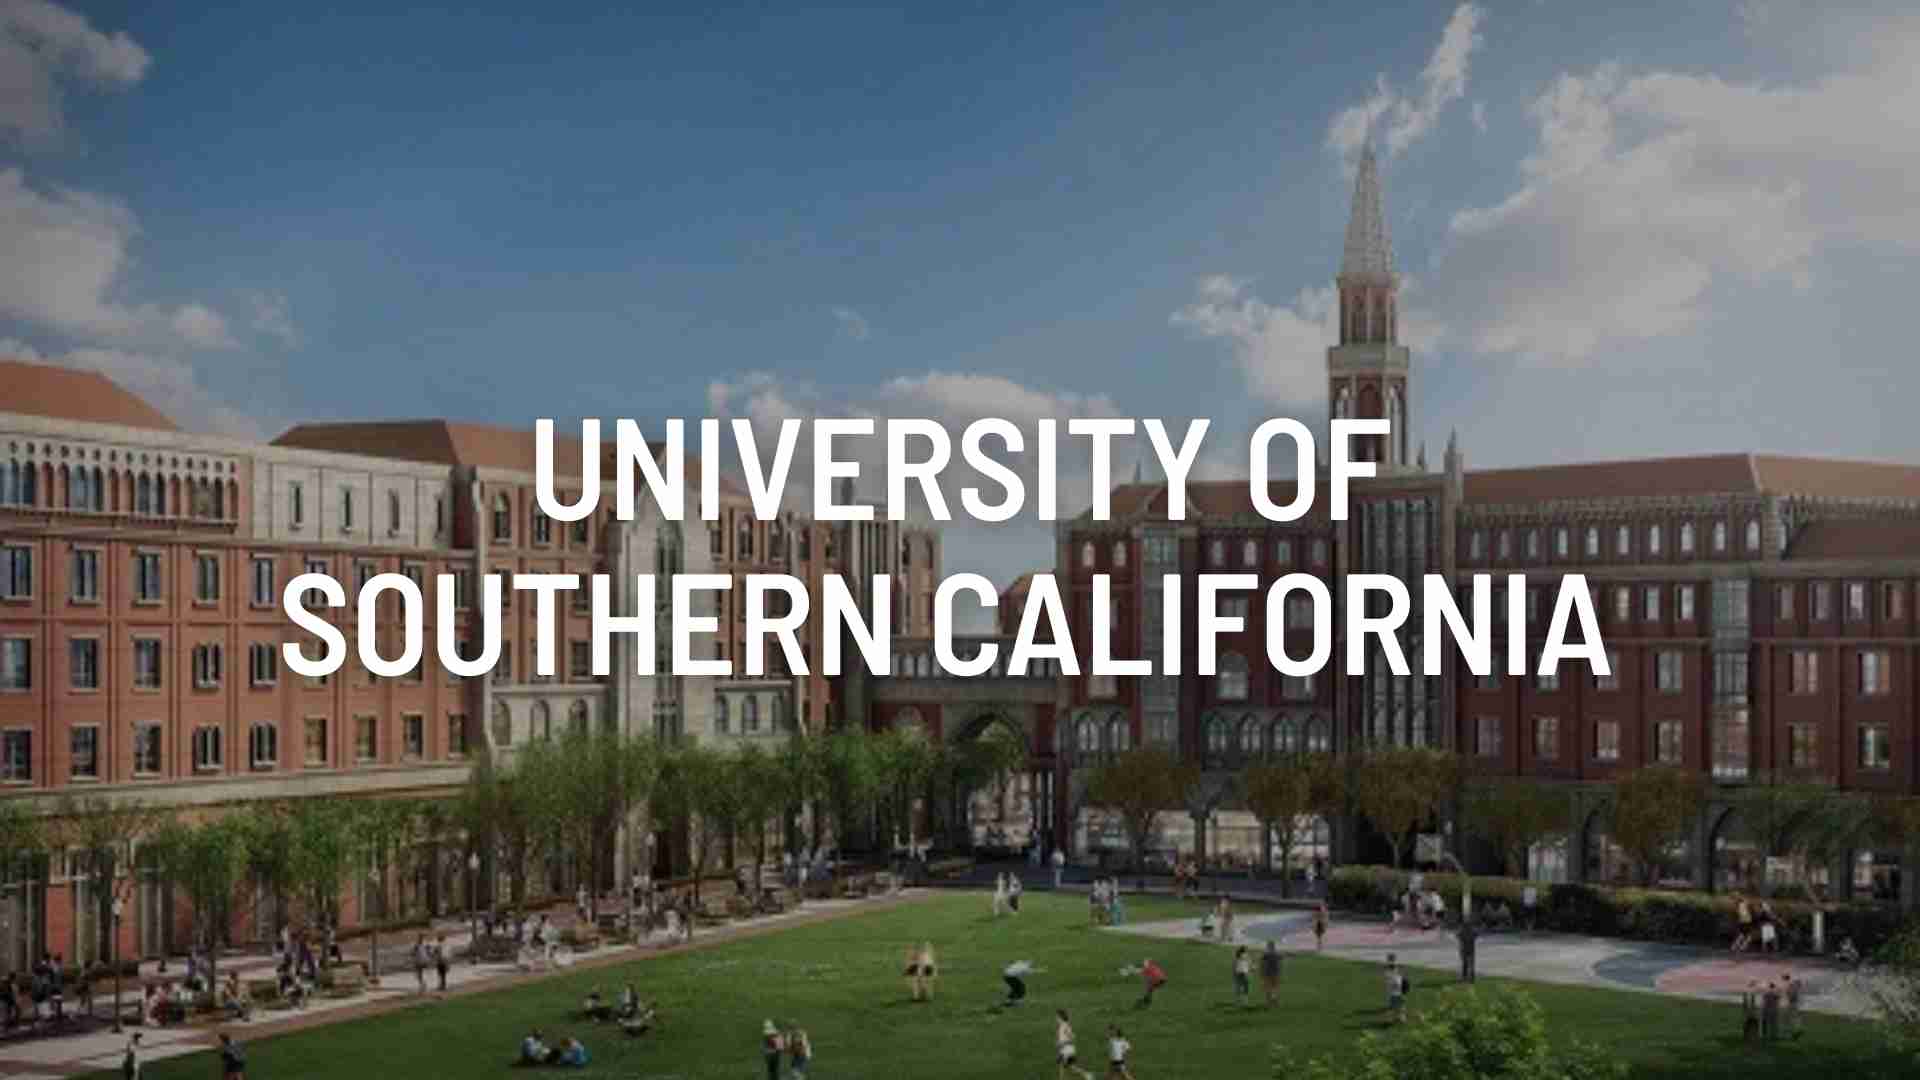 University of Southern California (Marshall School of Business)